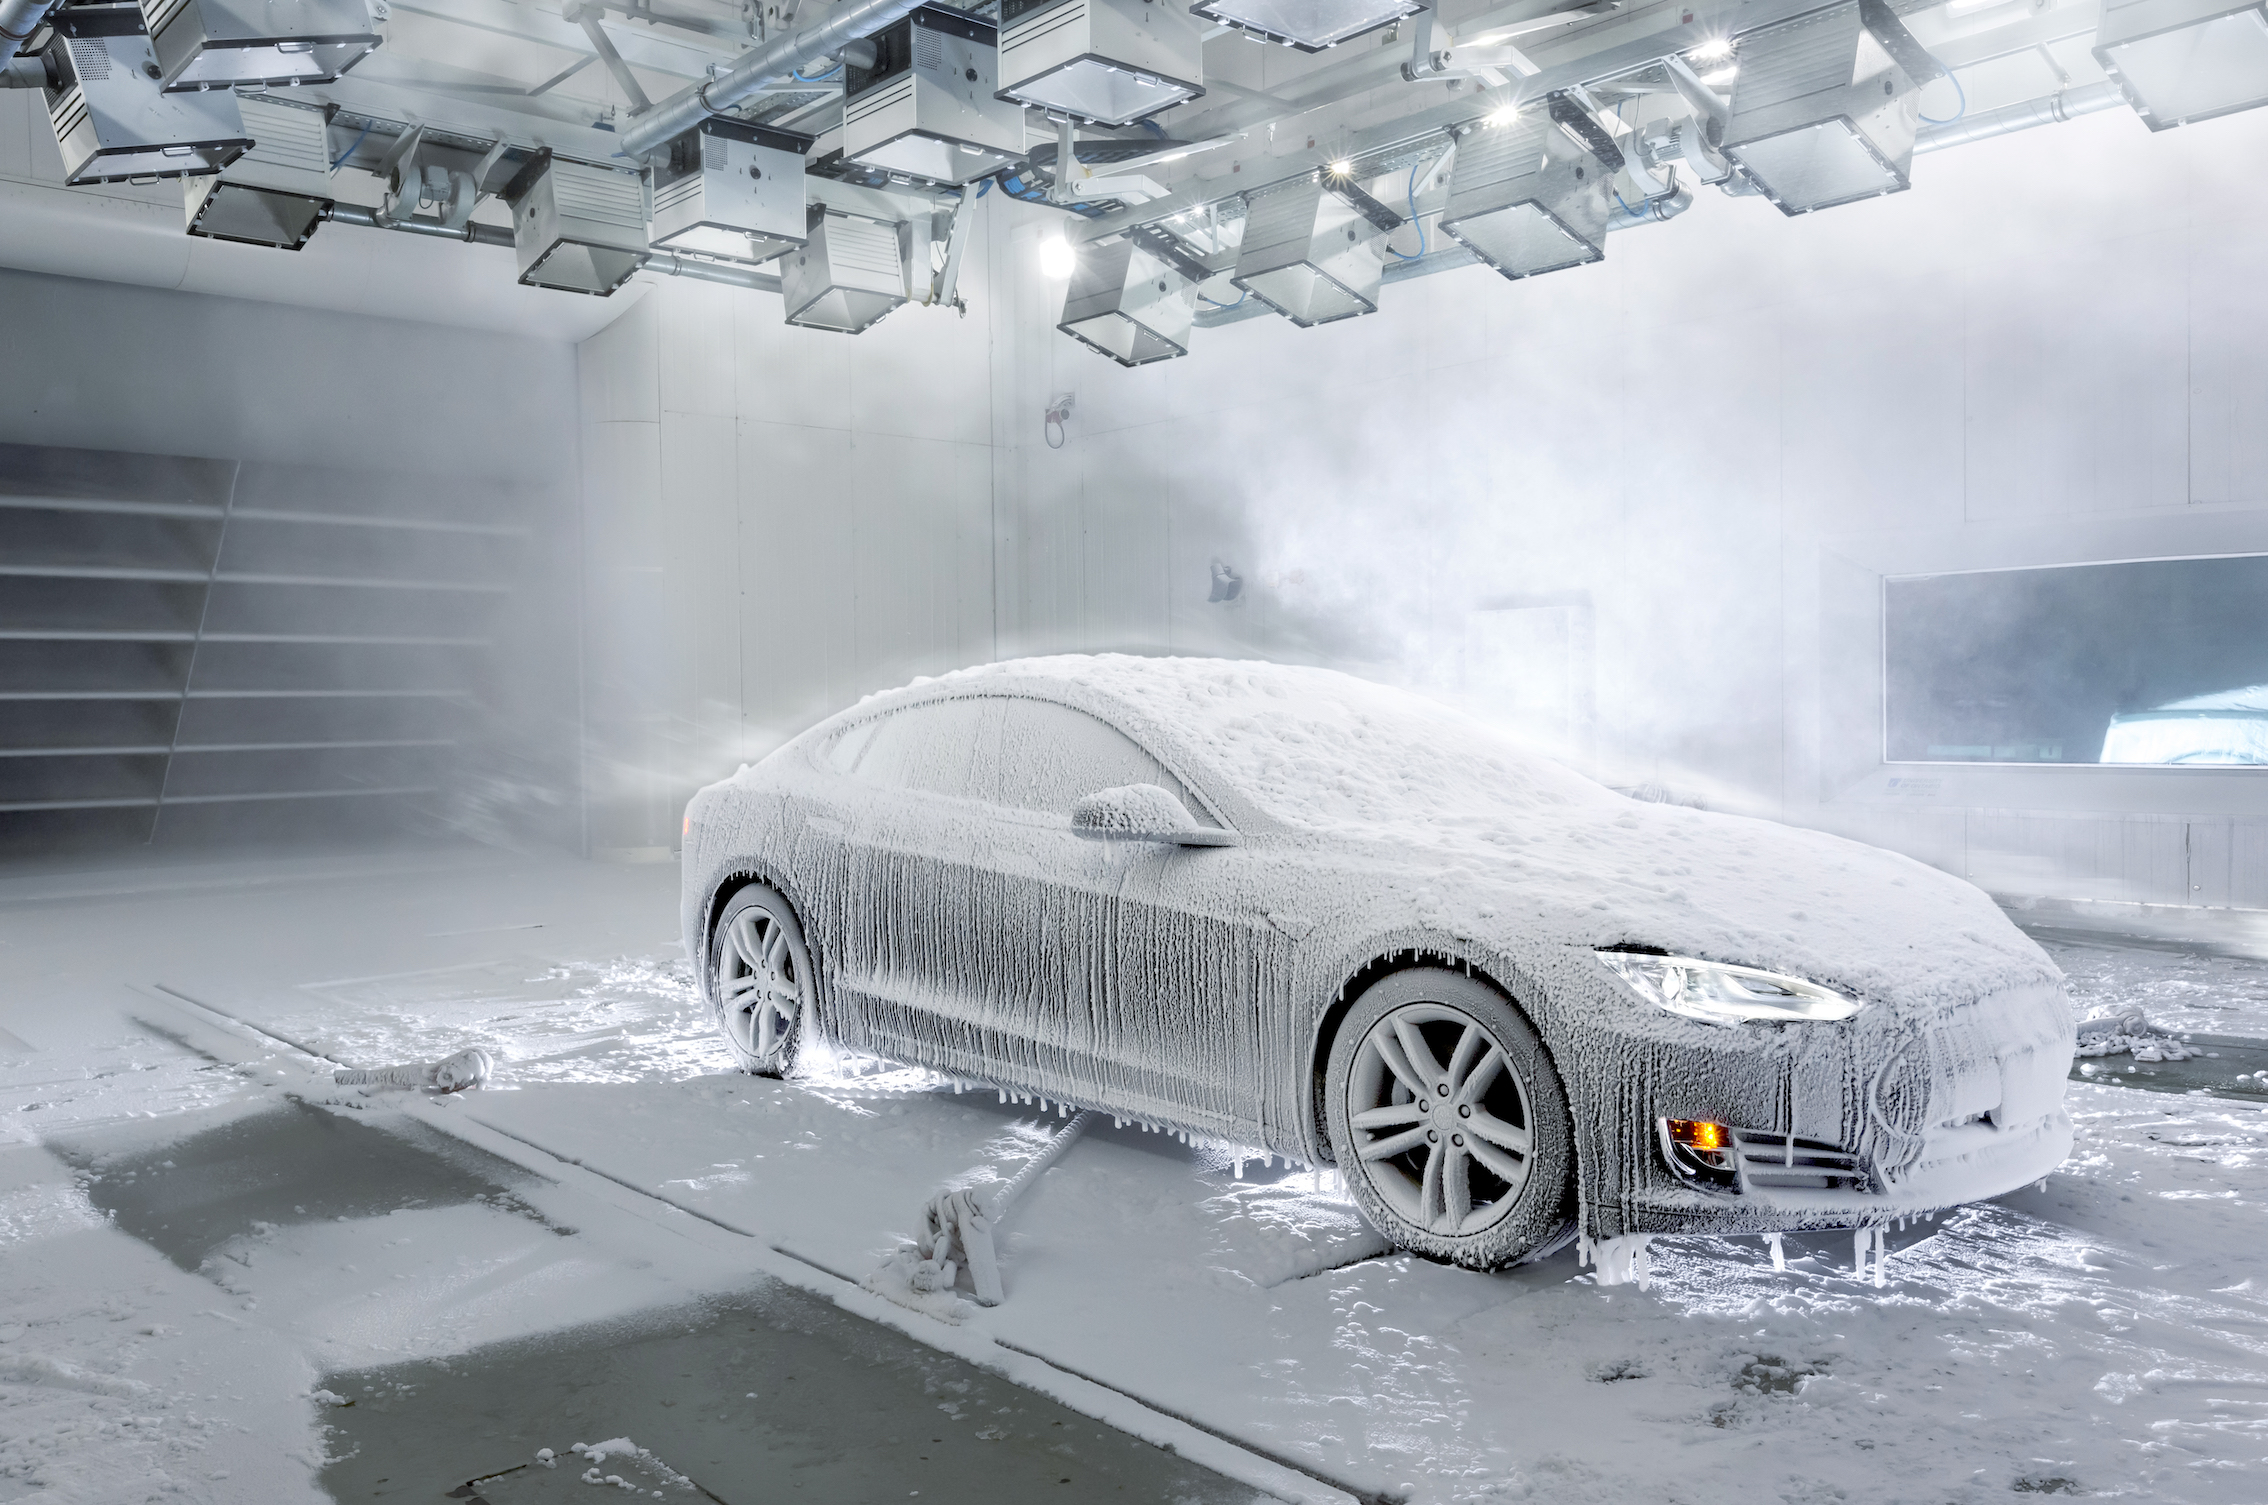 The cold weather testing wind tunnel with a car being tested